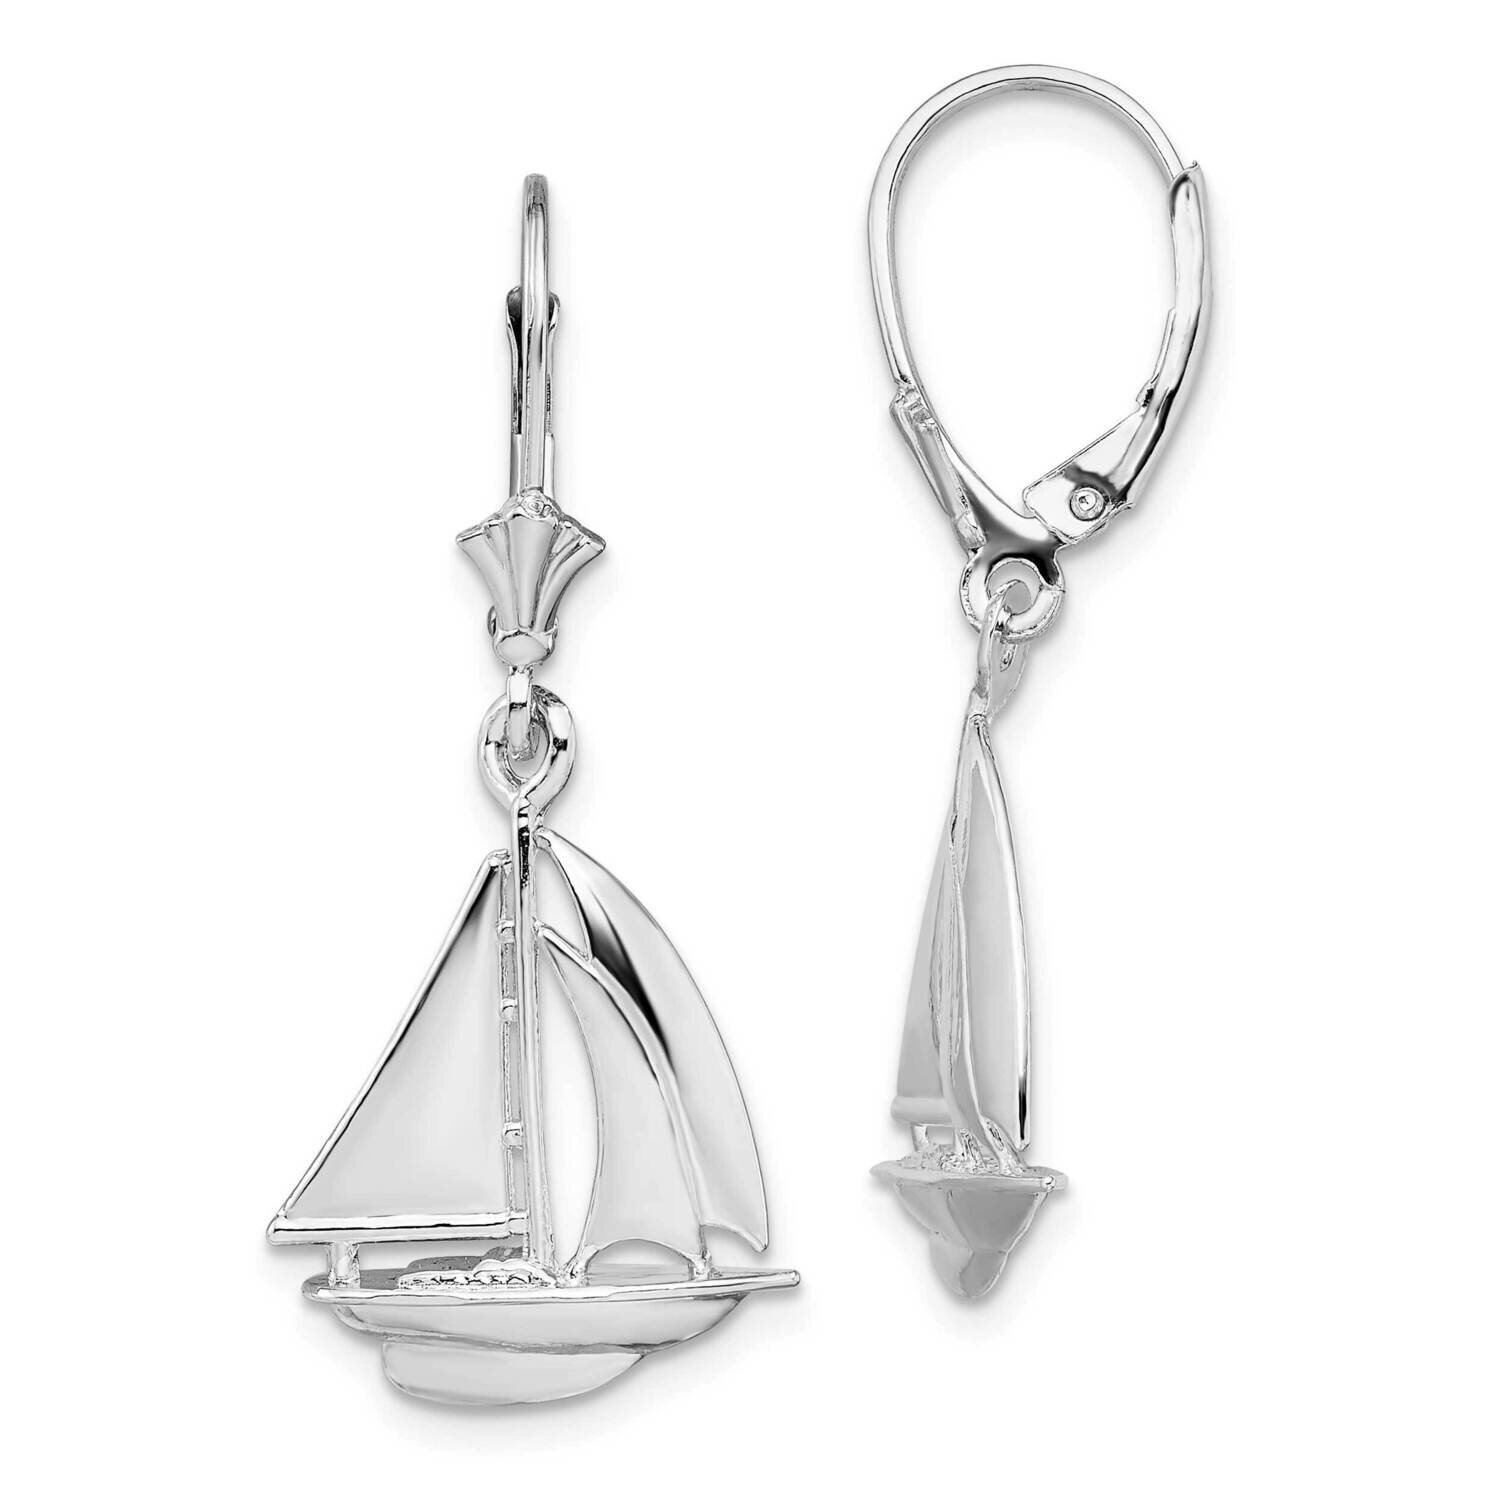 Sailboat Leverback Earrings Sterling Silver Polished QE15586